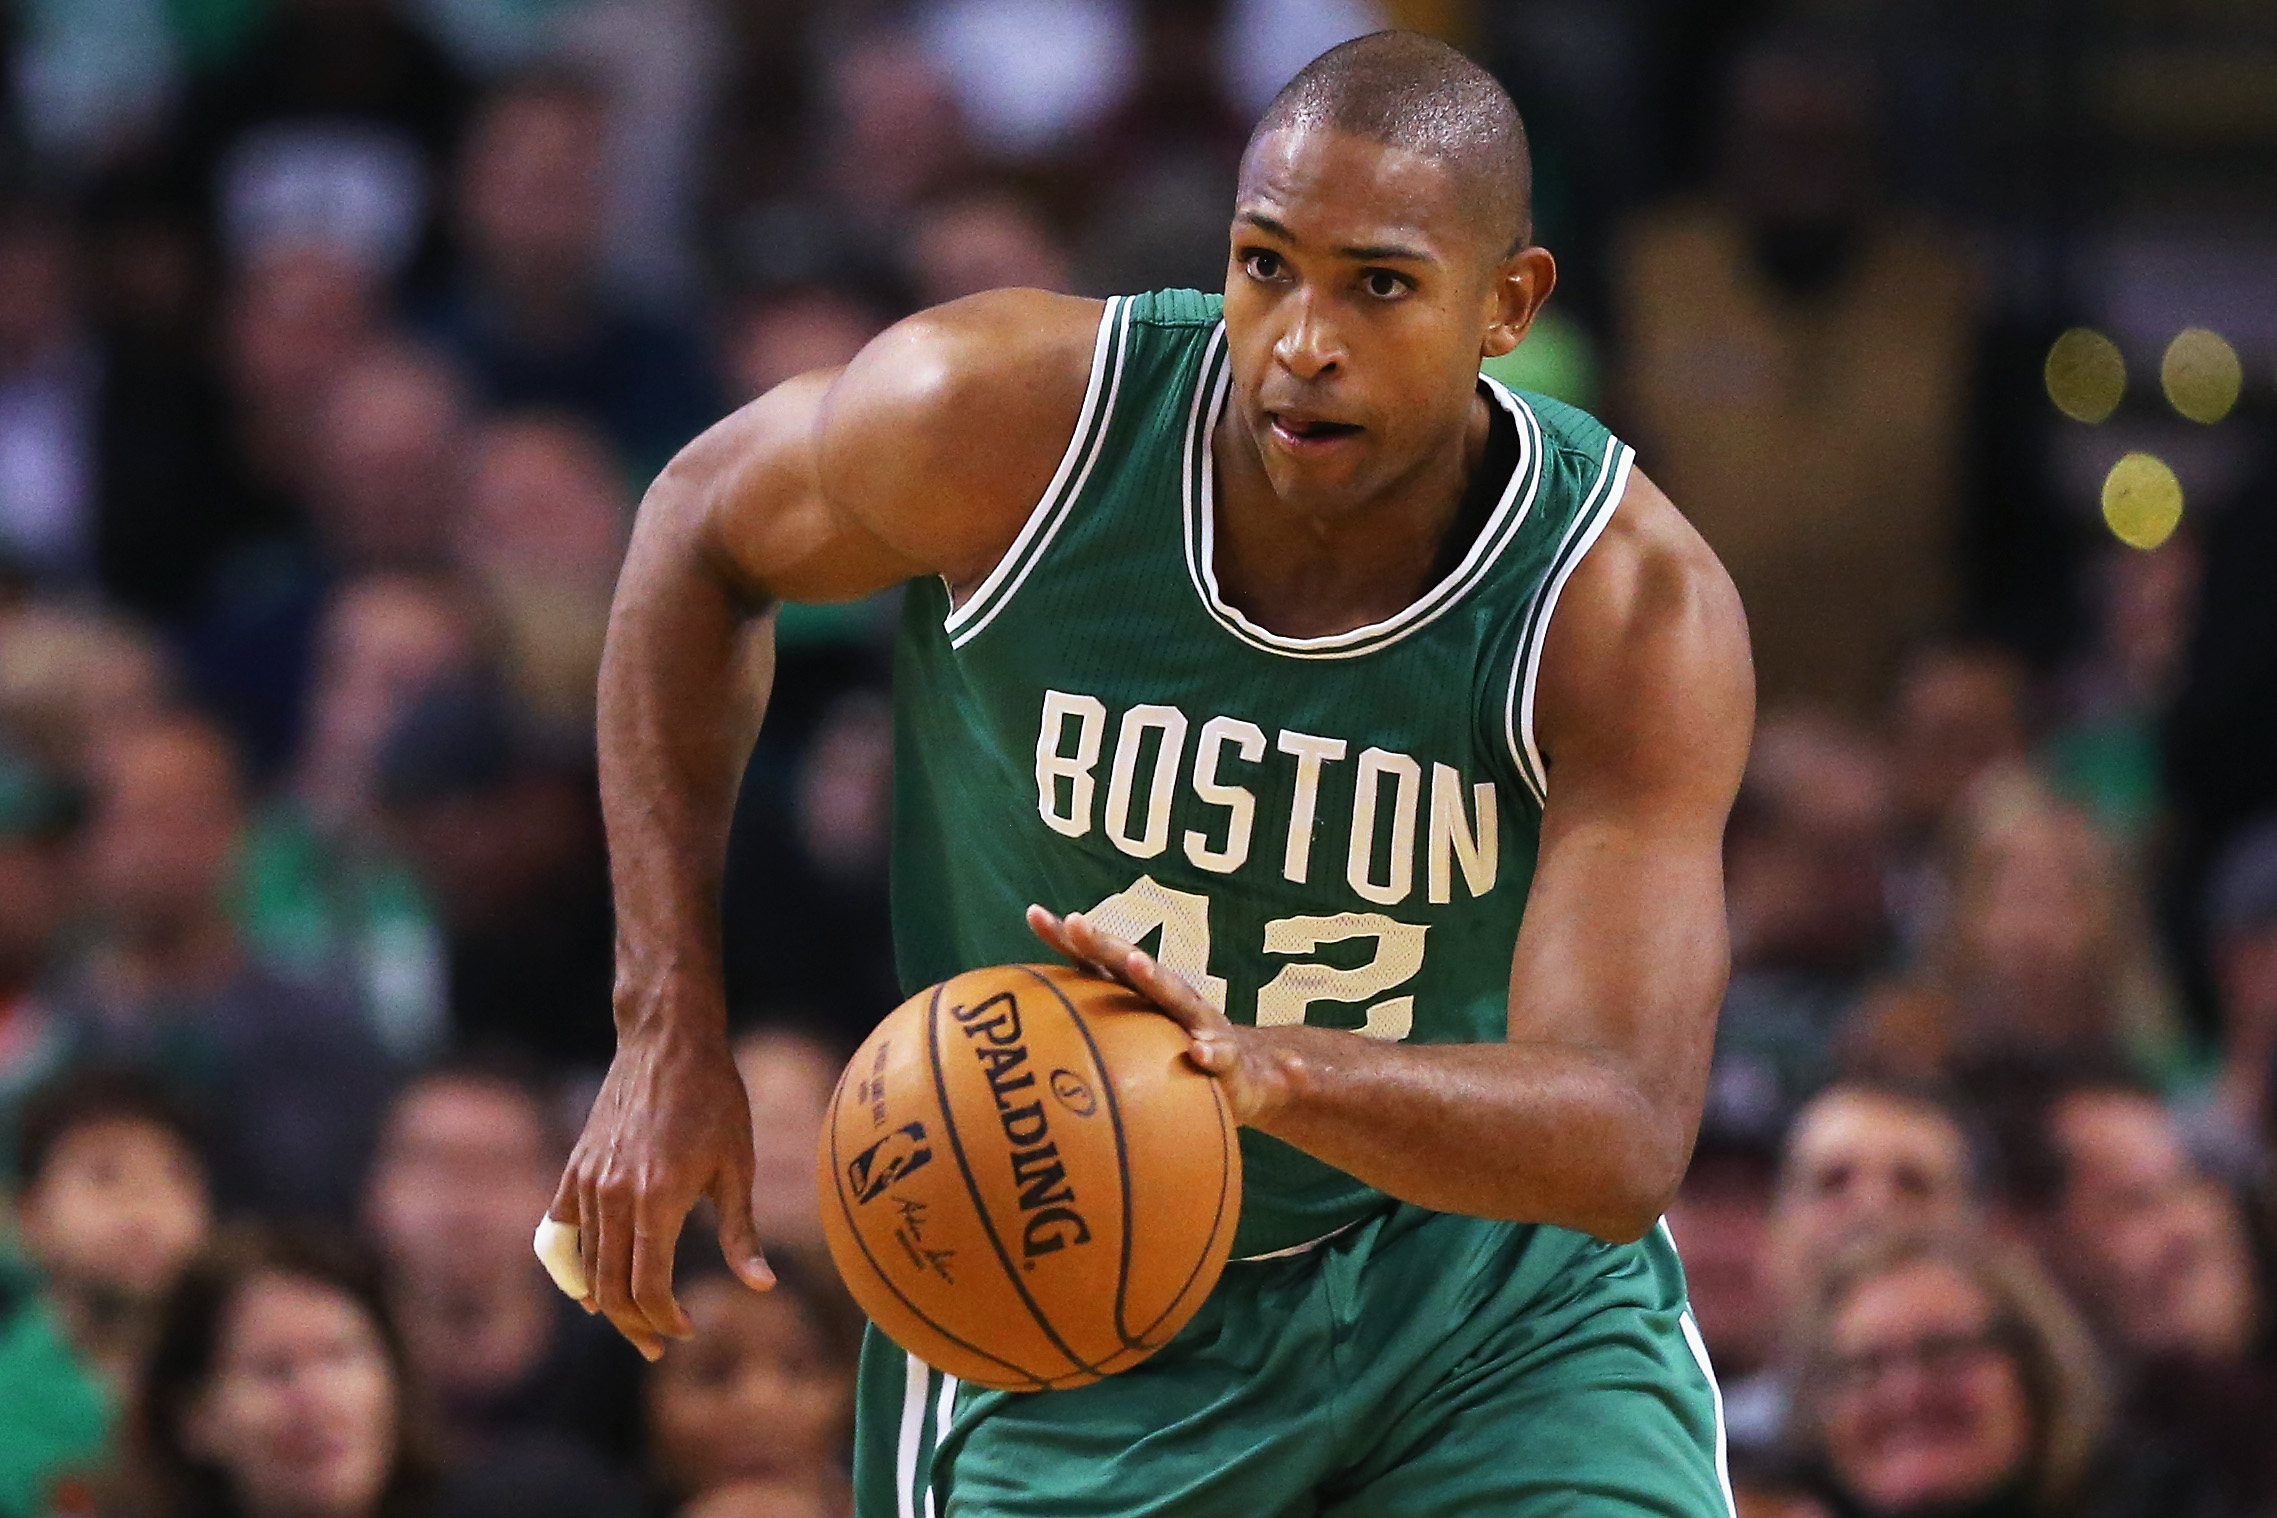 BOSTON, MA - OCTOBER 26: Al Horford #42 of the Boston Celtics drives against the Brooklyn Nets during the first quarter at TD Garden on October 26, 2016 in Boston, Massachusetts. NOTE TO USER: User expressly acknowledges and agrees that, by downloading and/or using this photograph, user is consenting to the terms and conditions of the Getty Images License Agreement.   Maddie Meyer/Getty Images/AFP